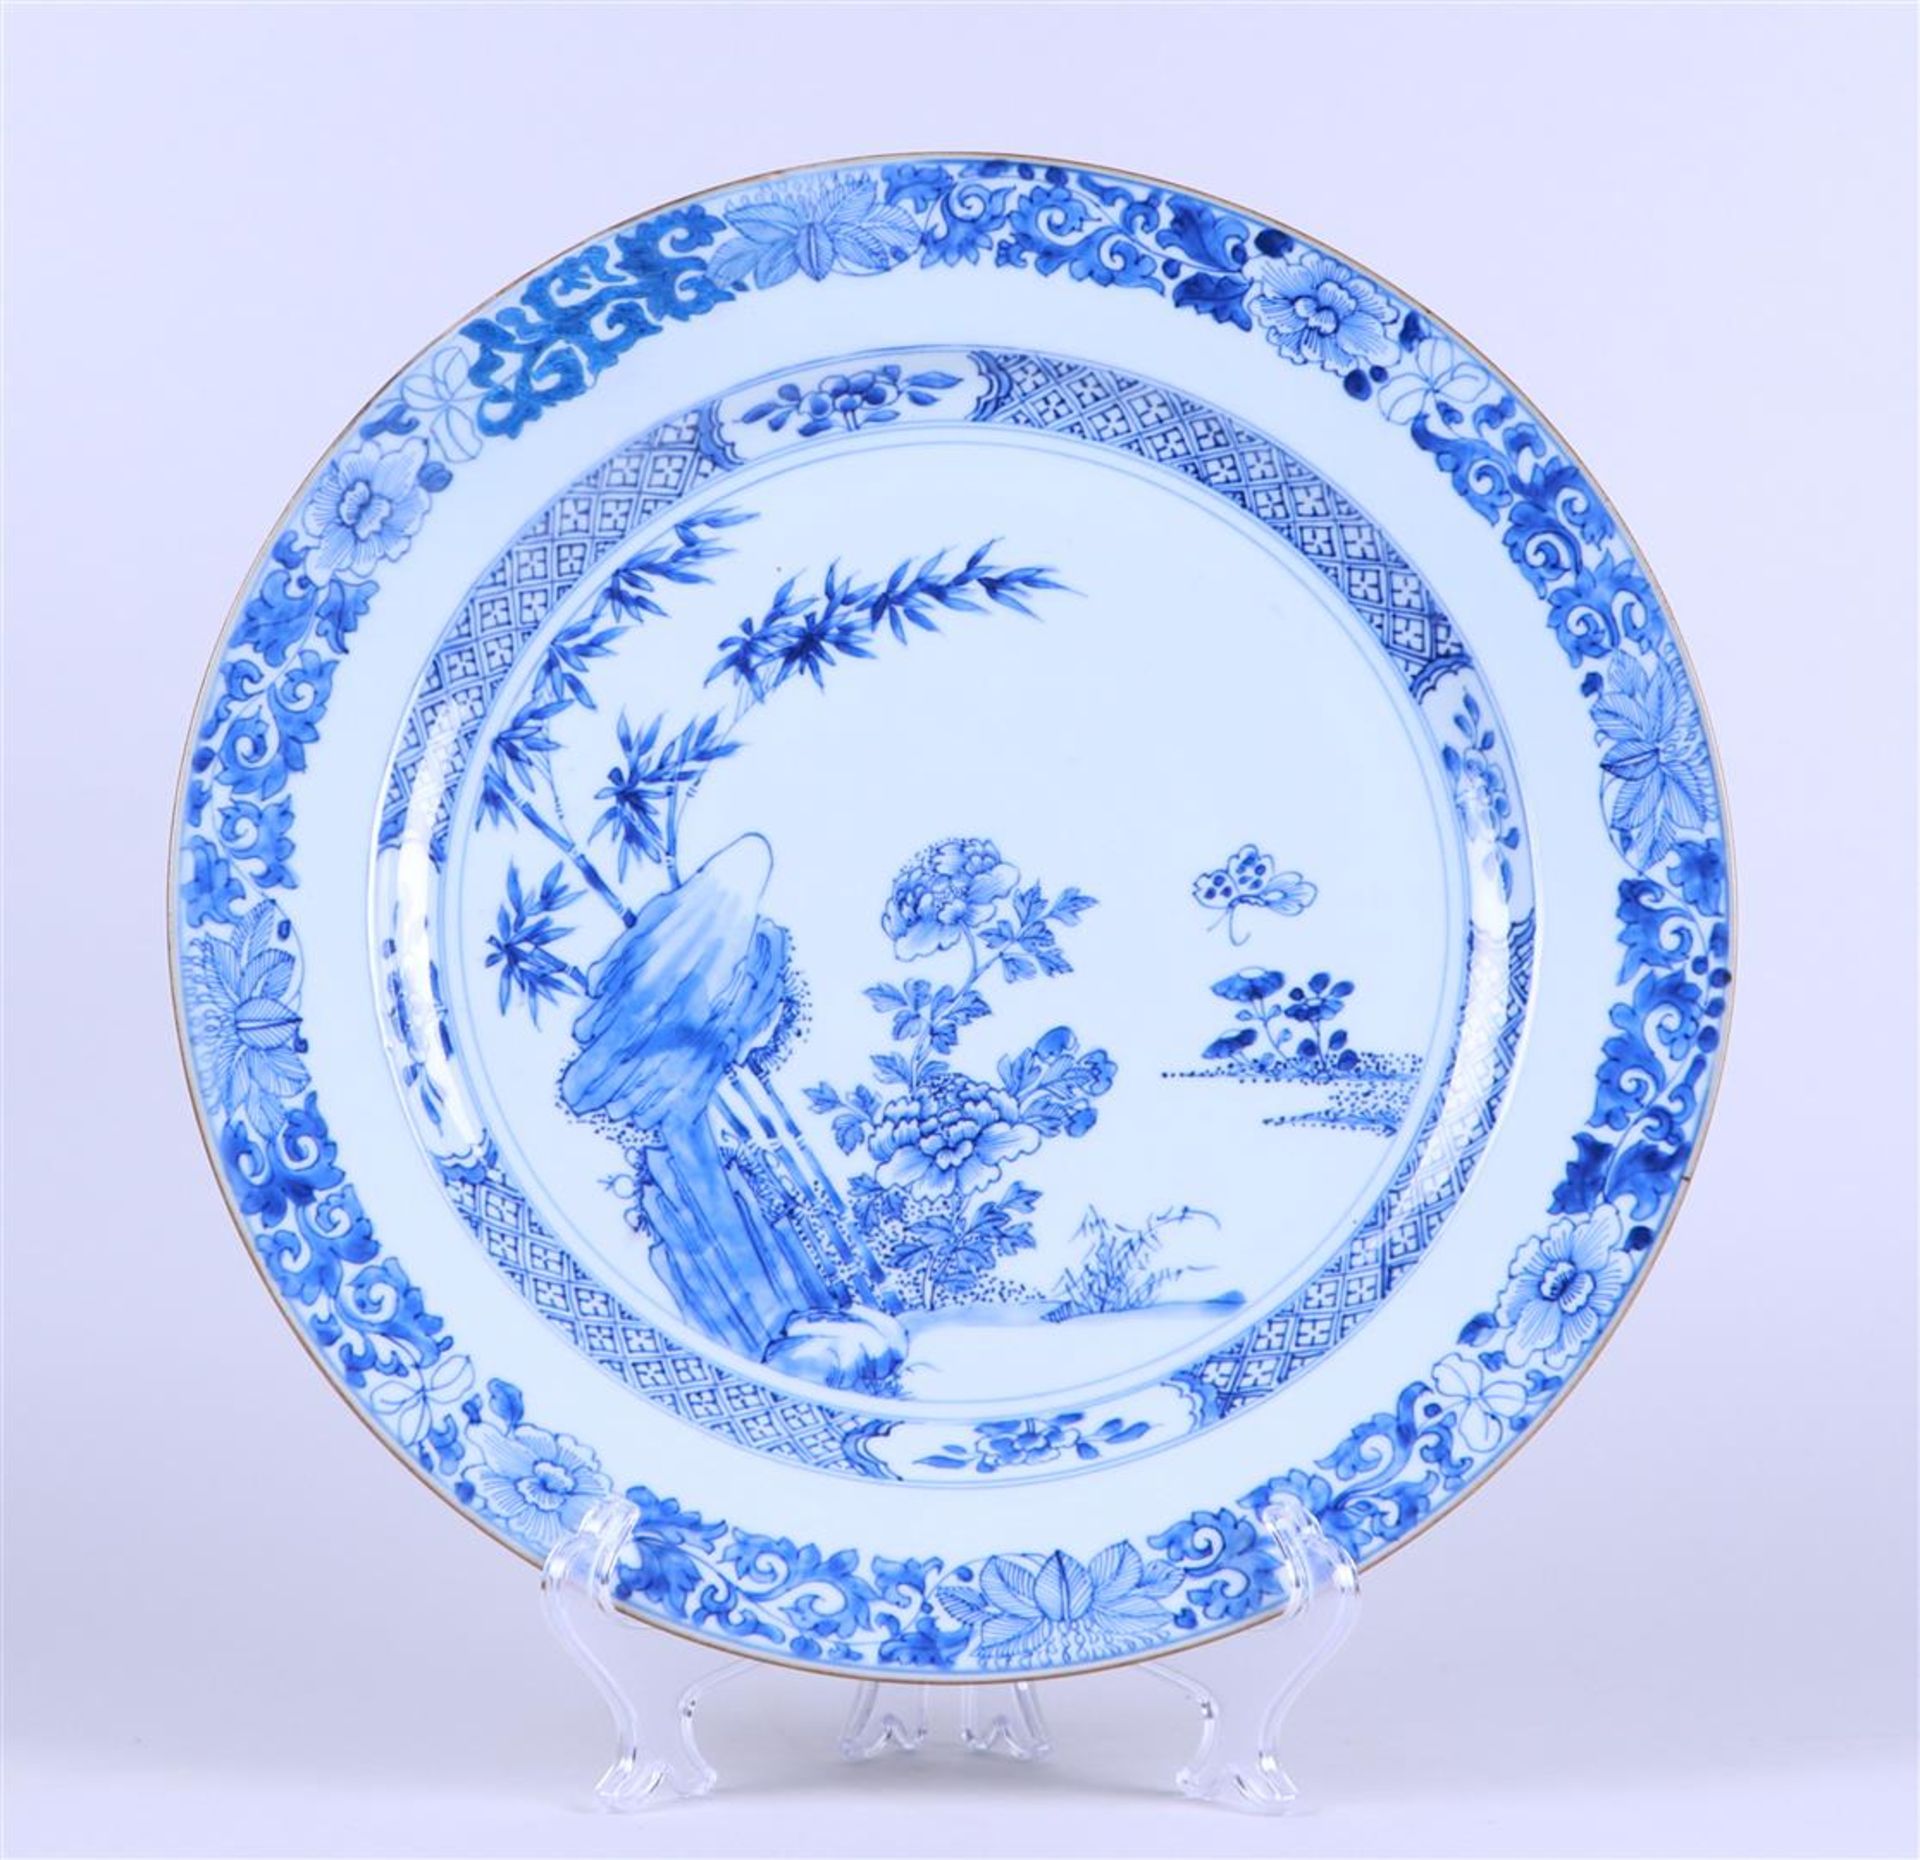 A porcelain dish with rich floral decoration near a rock with butterfly, outer edge with floral deco